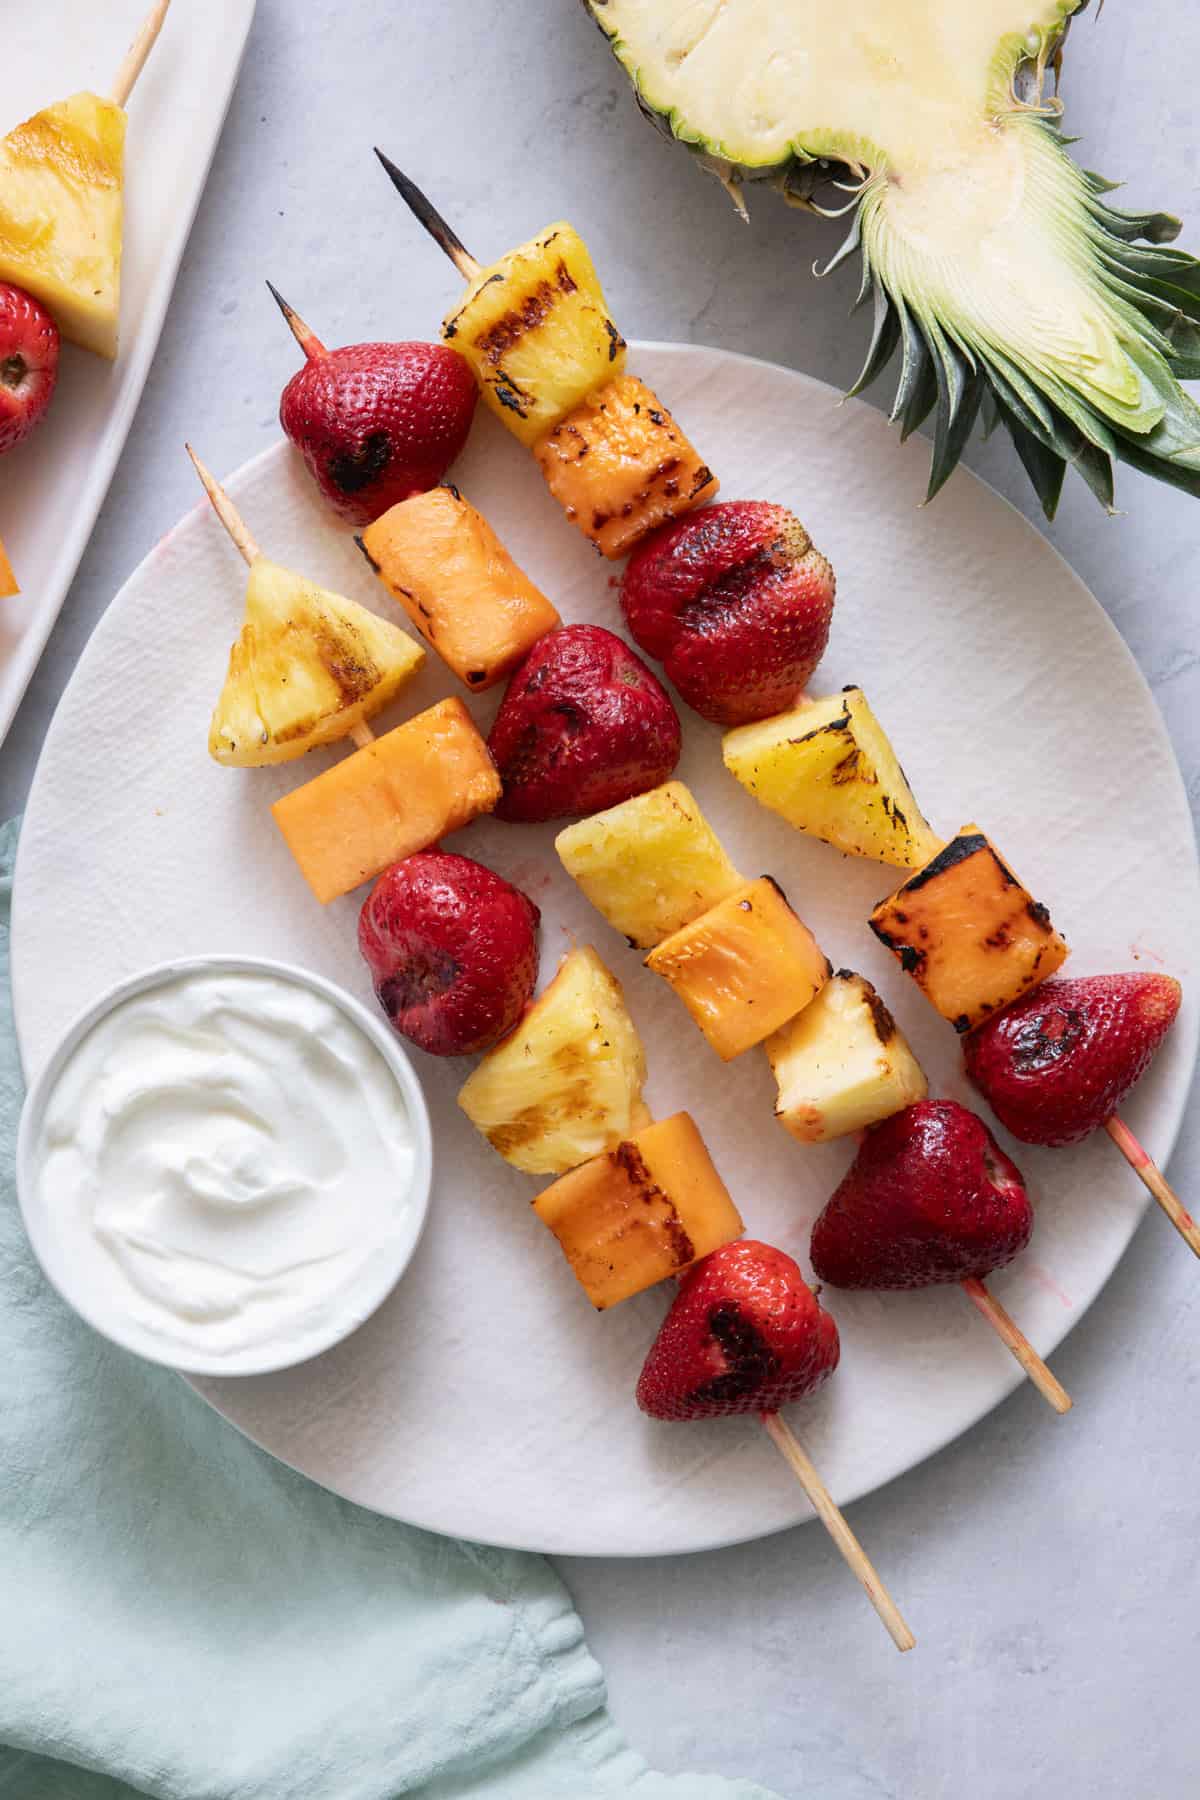 I. Introduction to Grilled Fruit Skewers